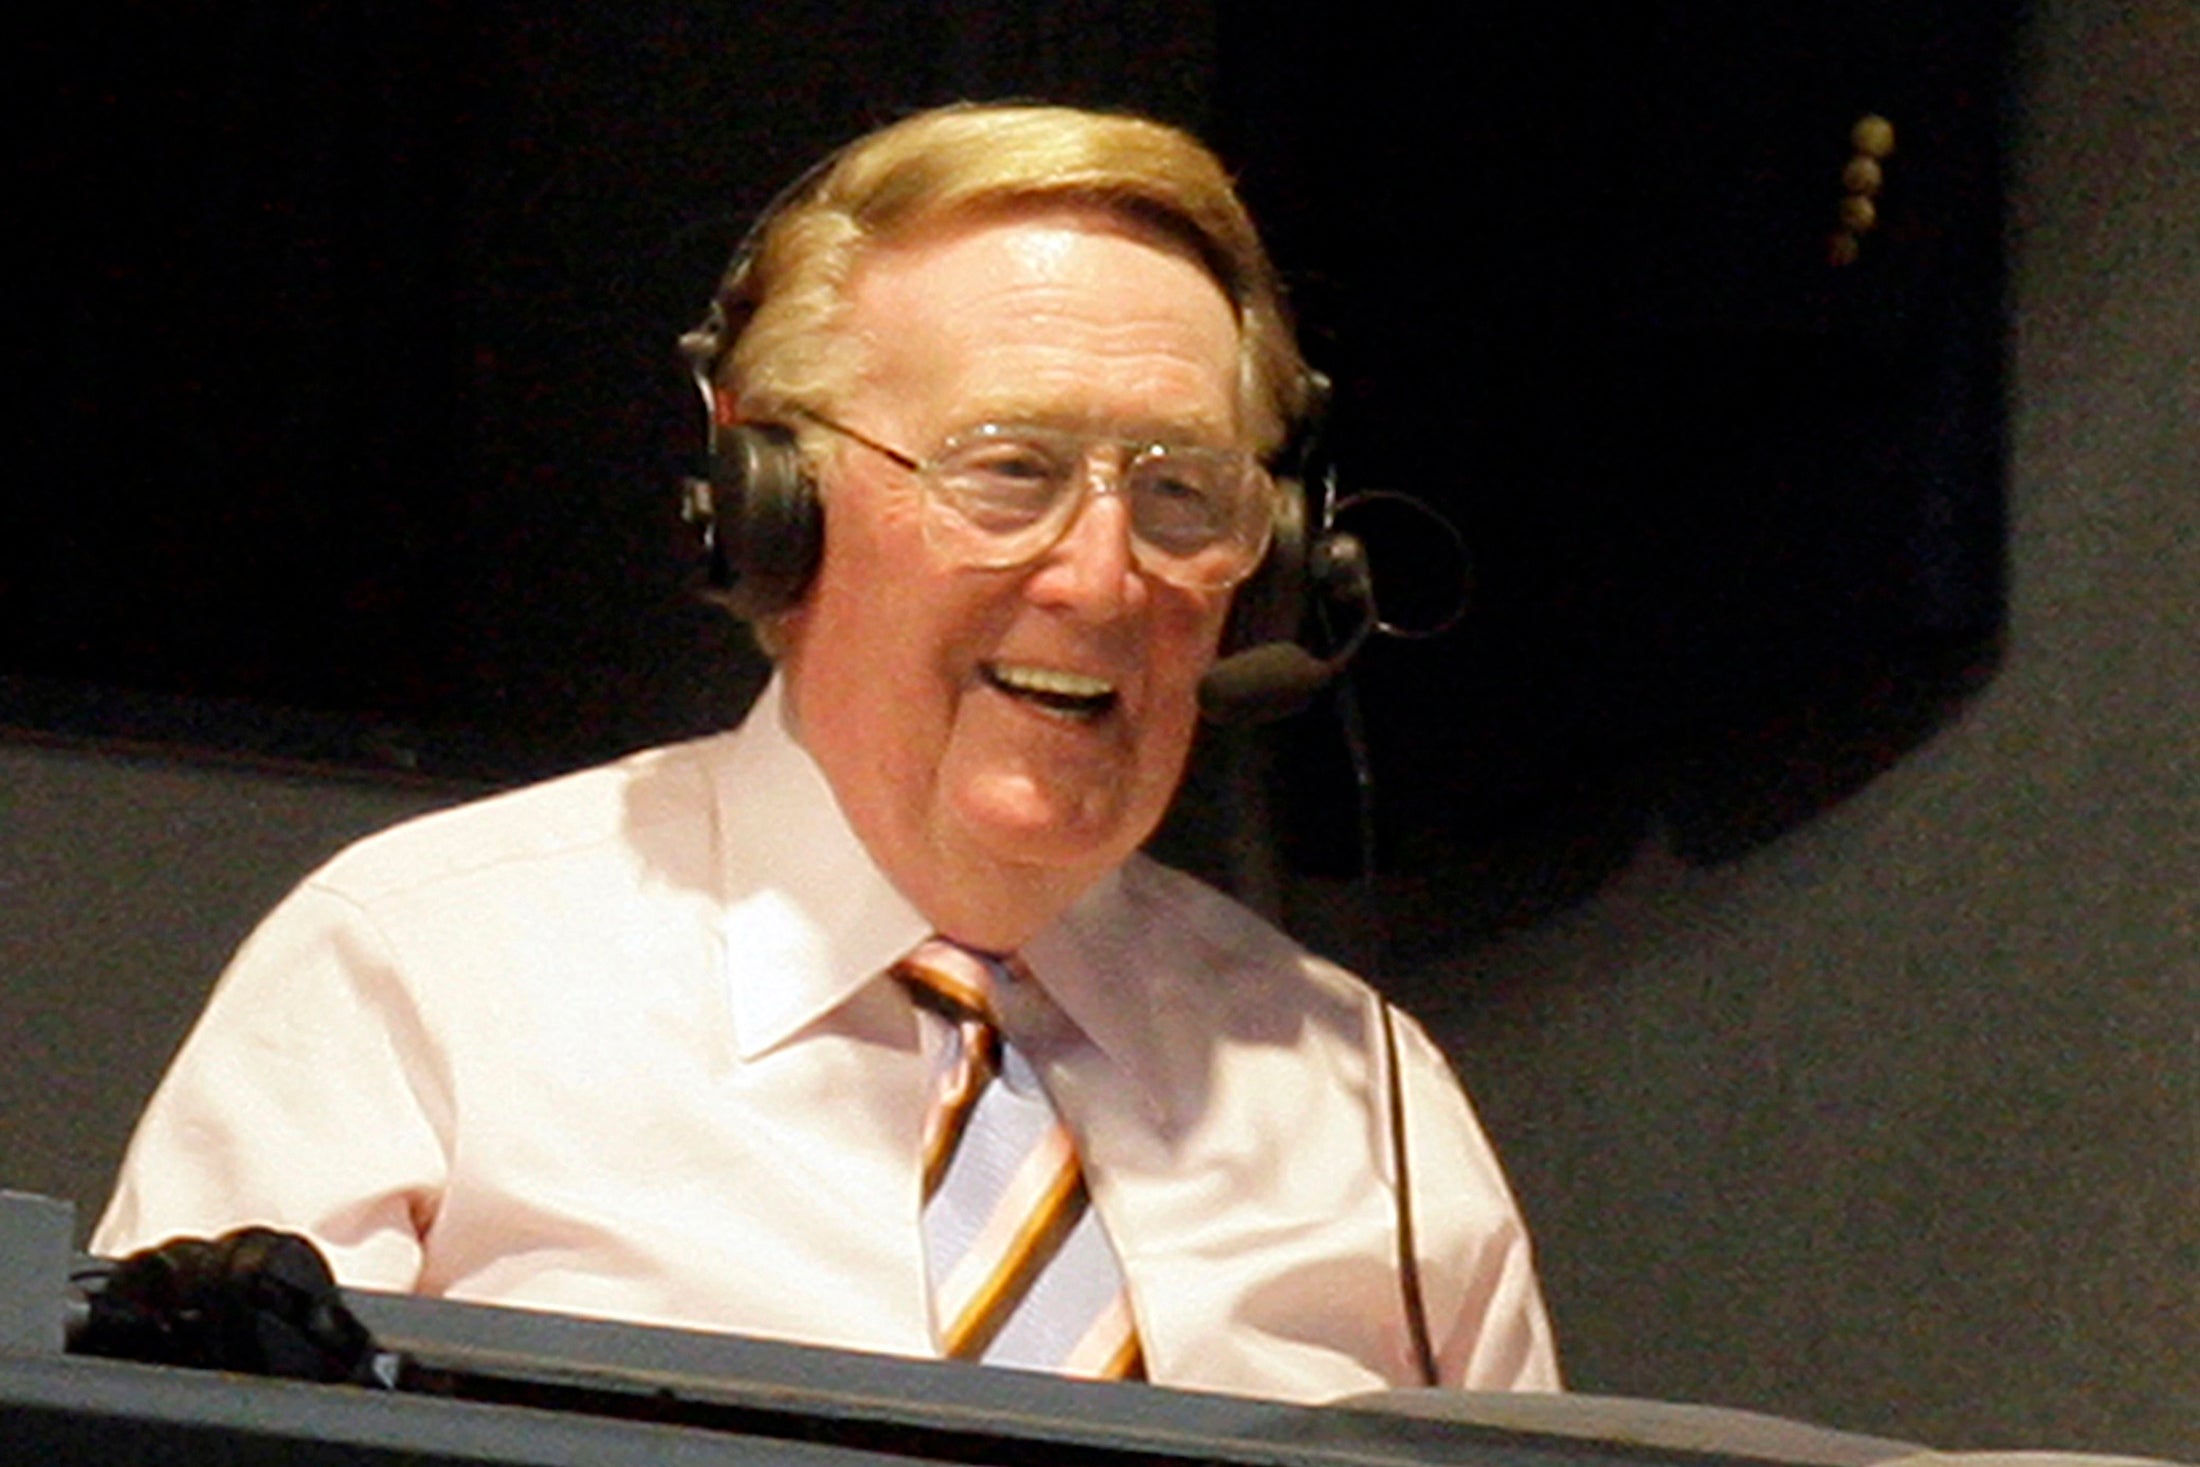 Scully smiling in a headset in the broadcast booth at the stadium.